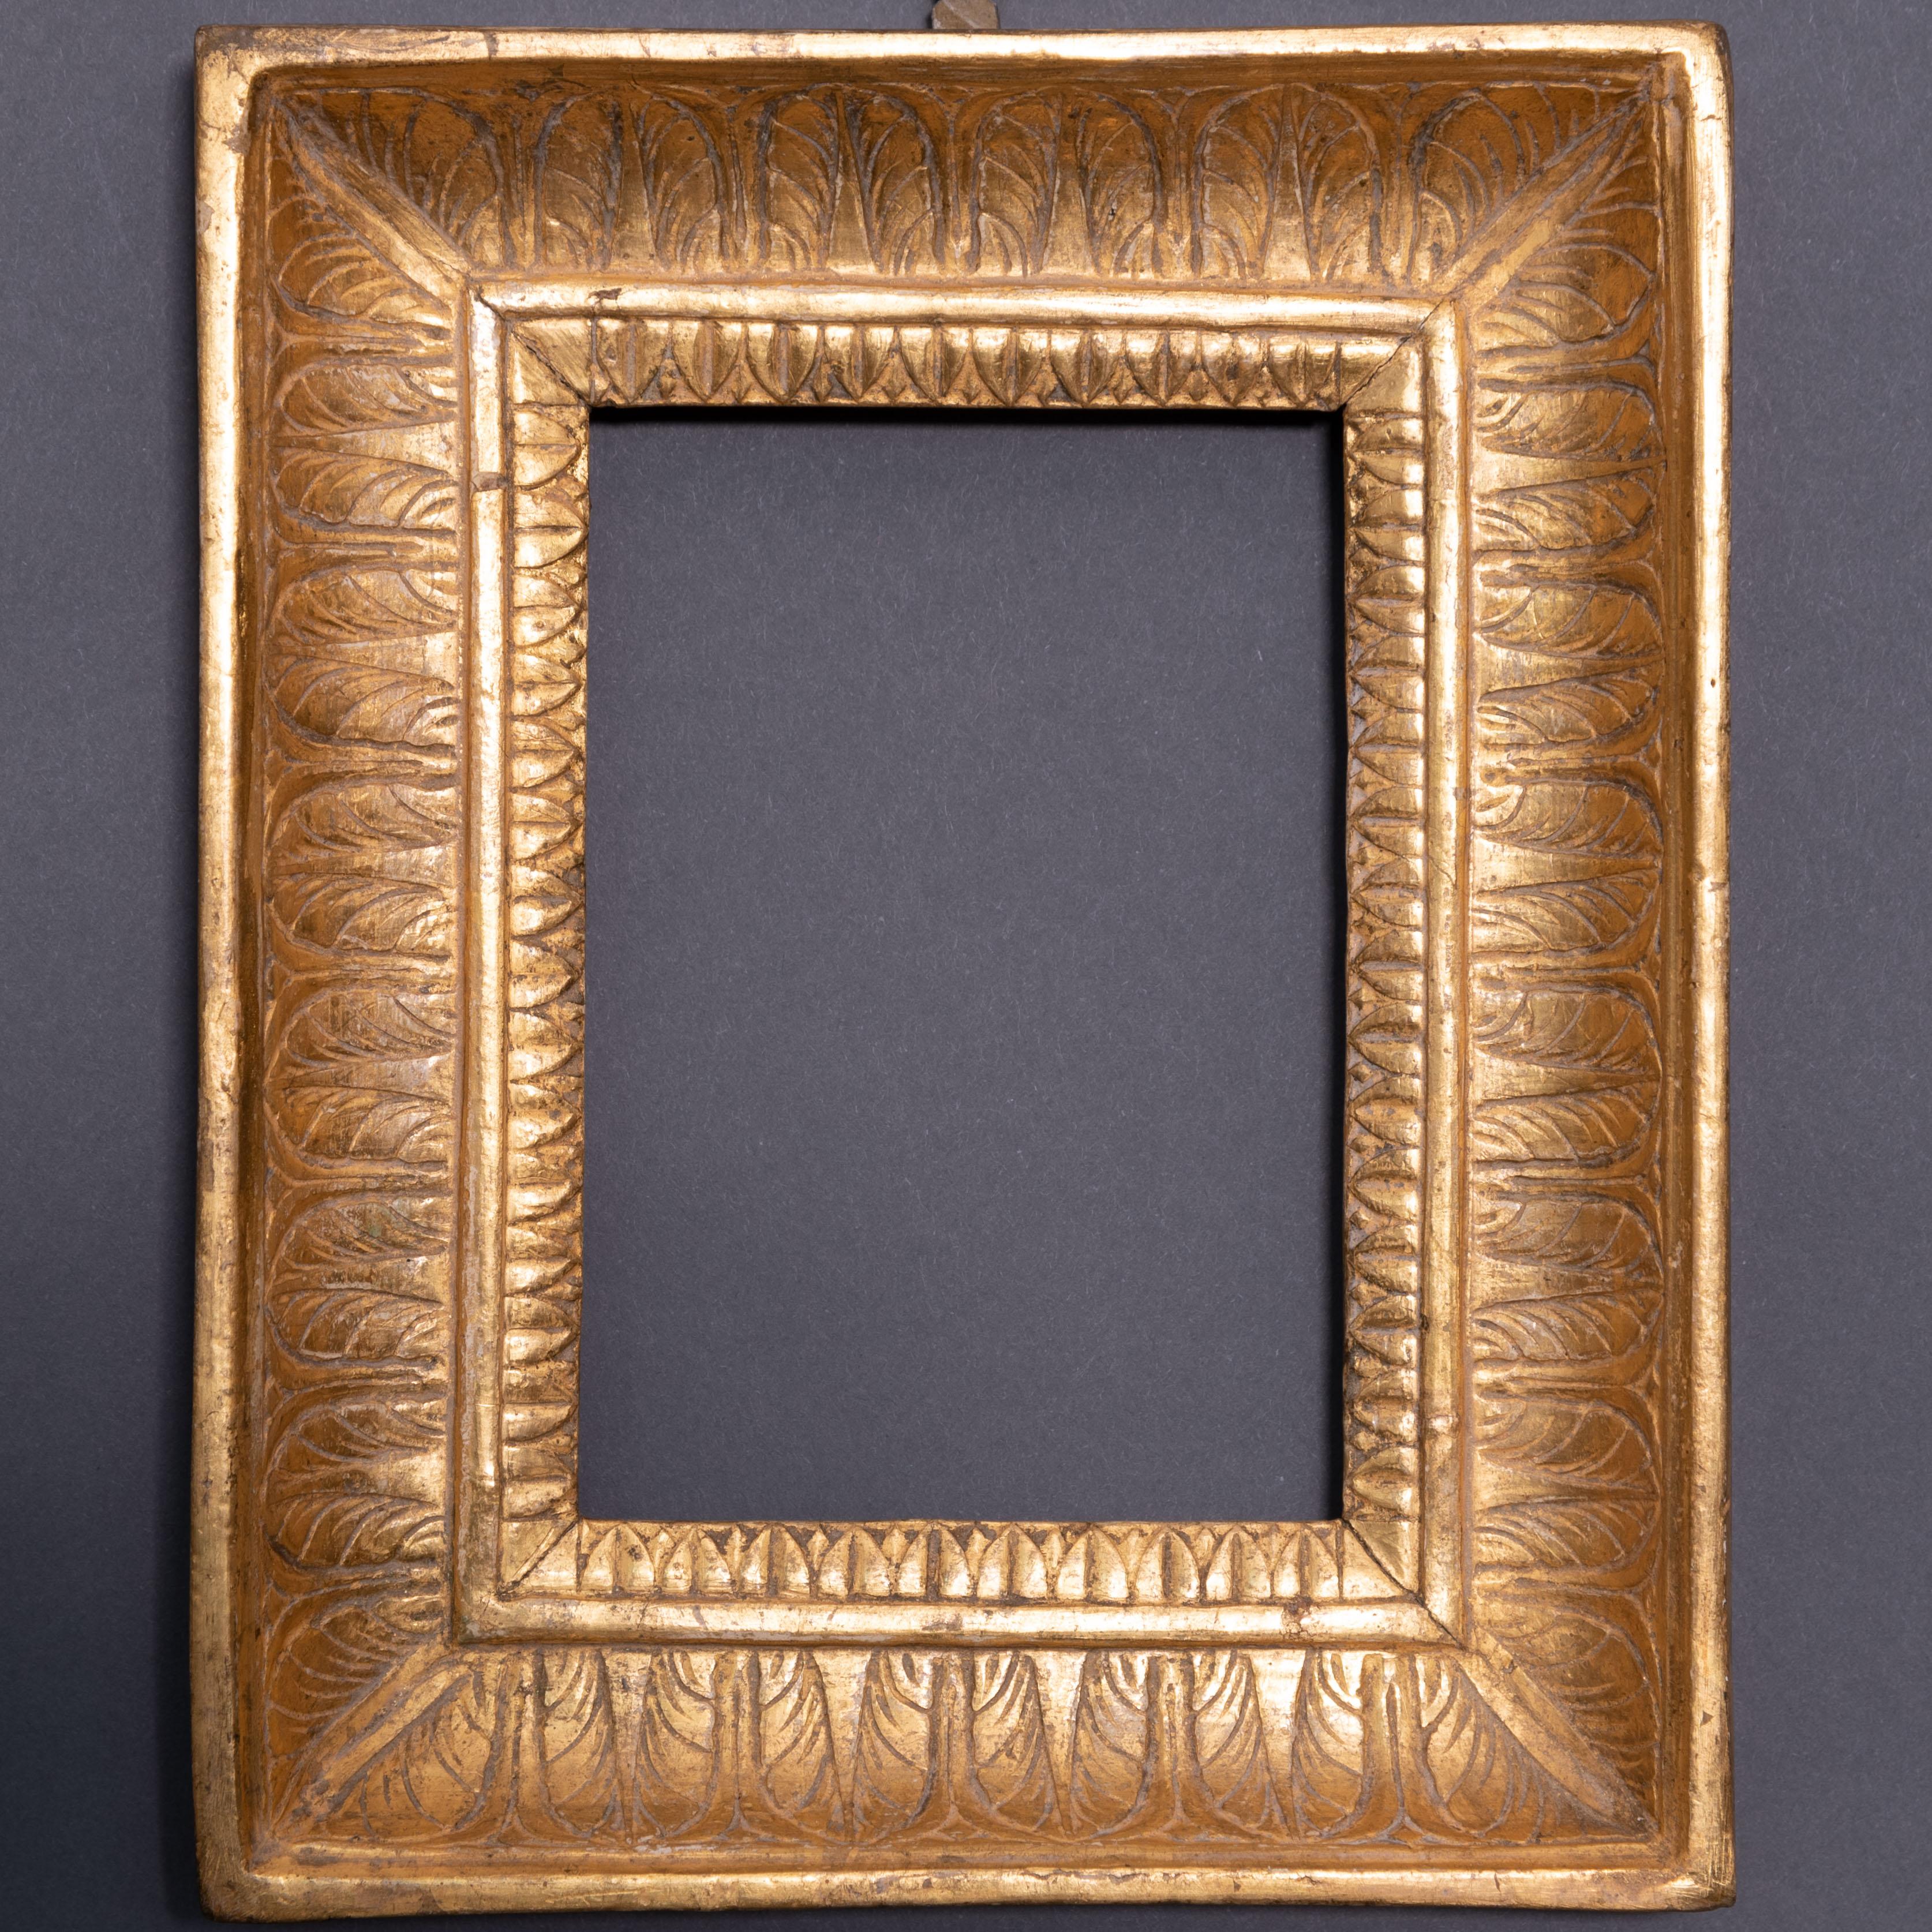 Period Giltwood Italian Empire SXtyle Frame For Sale 2